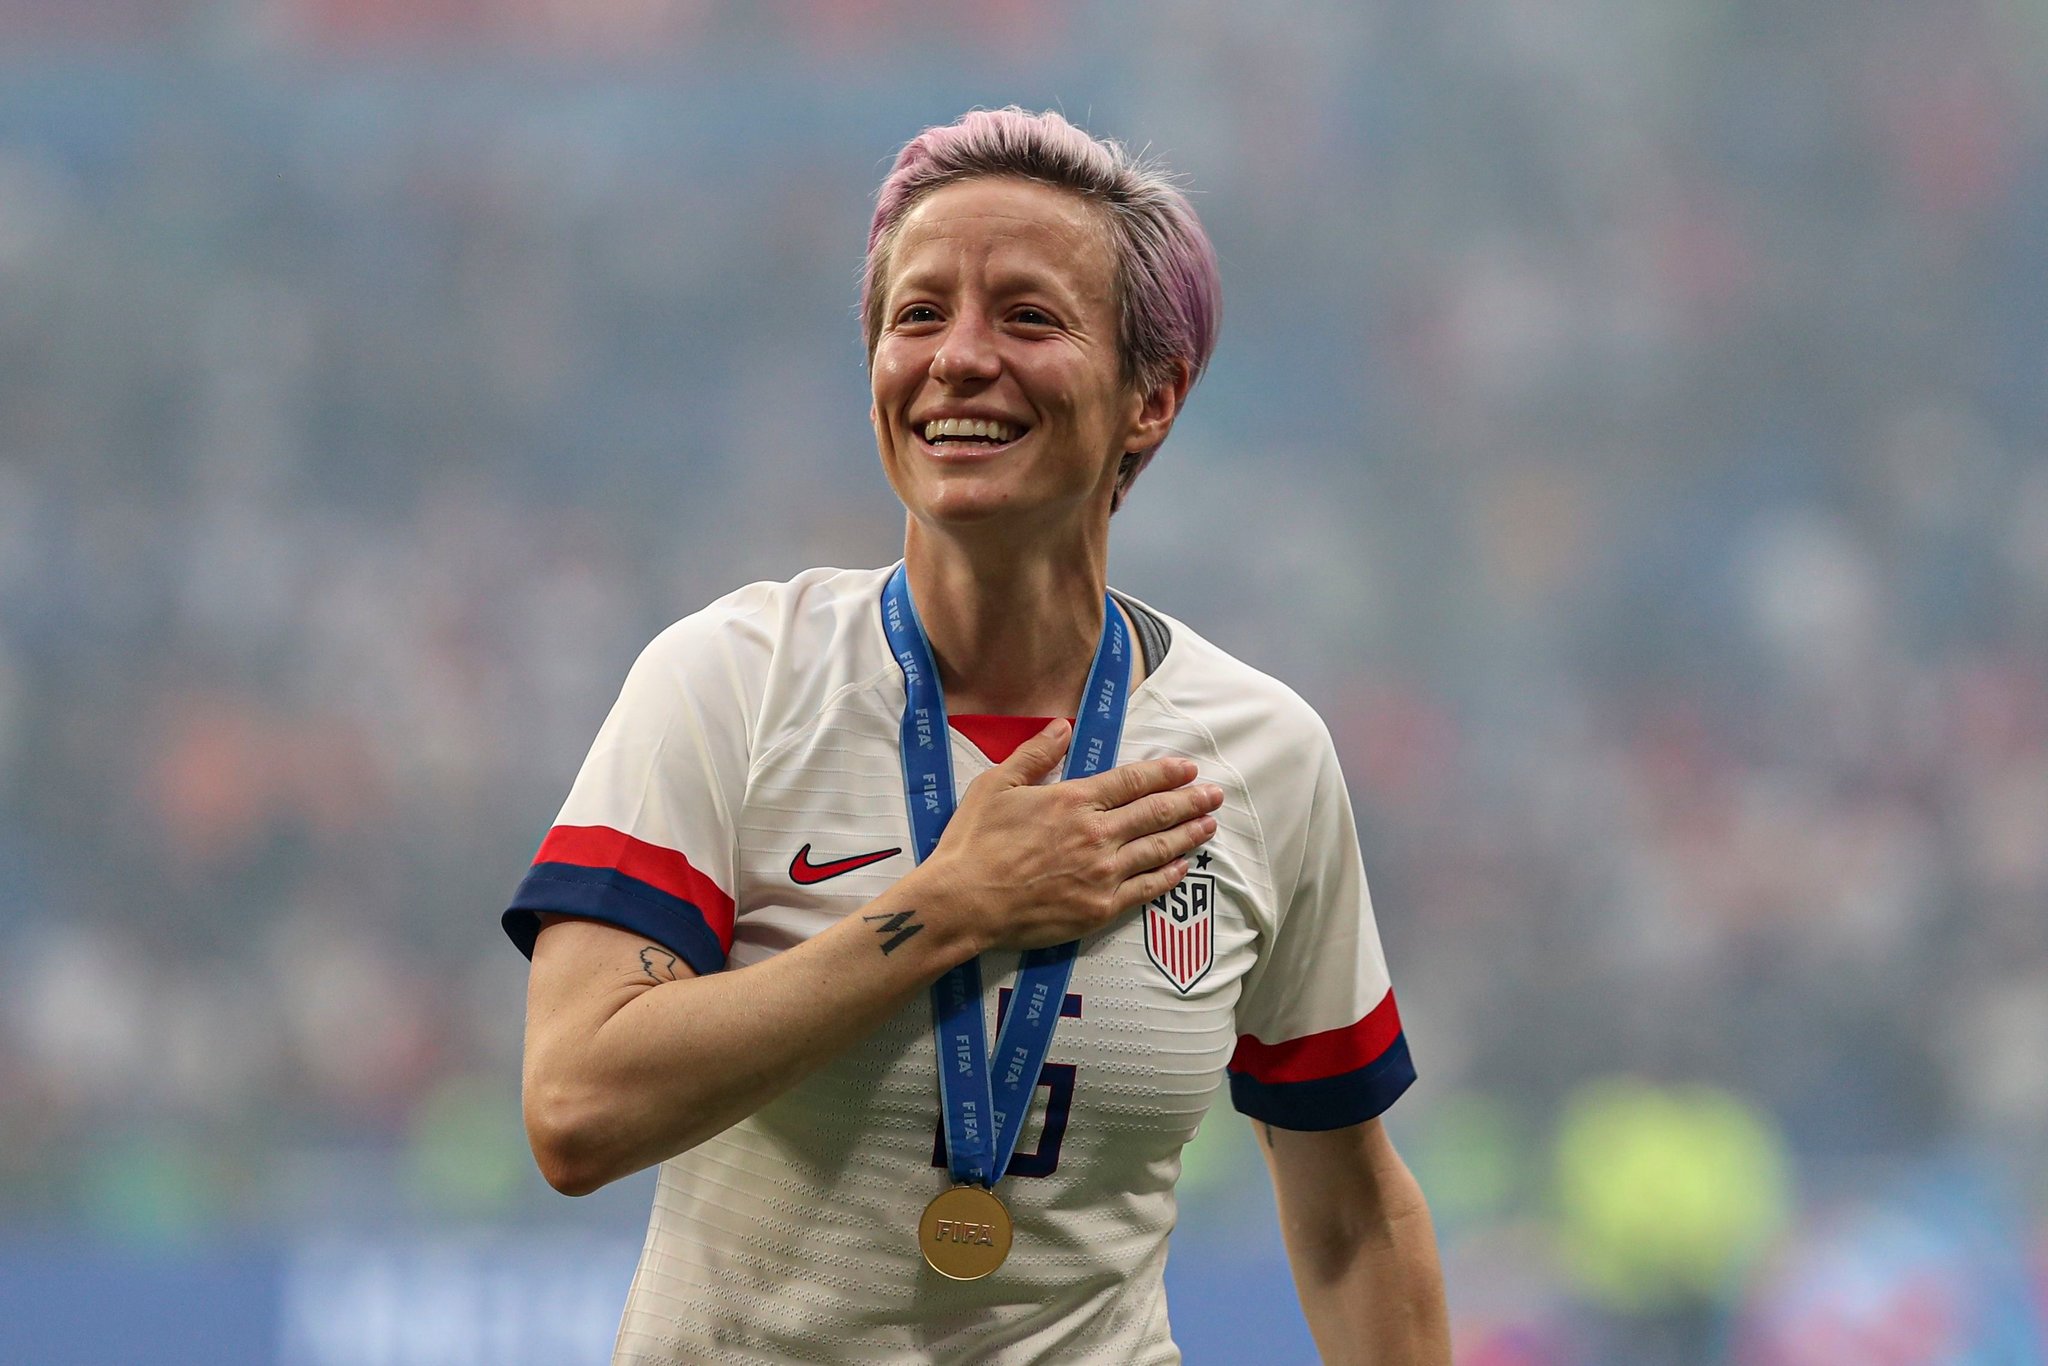 Which country did Megan Rapinoe play for in the 2012 London Olympics?